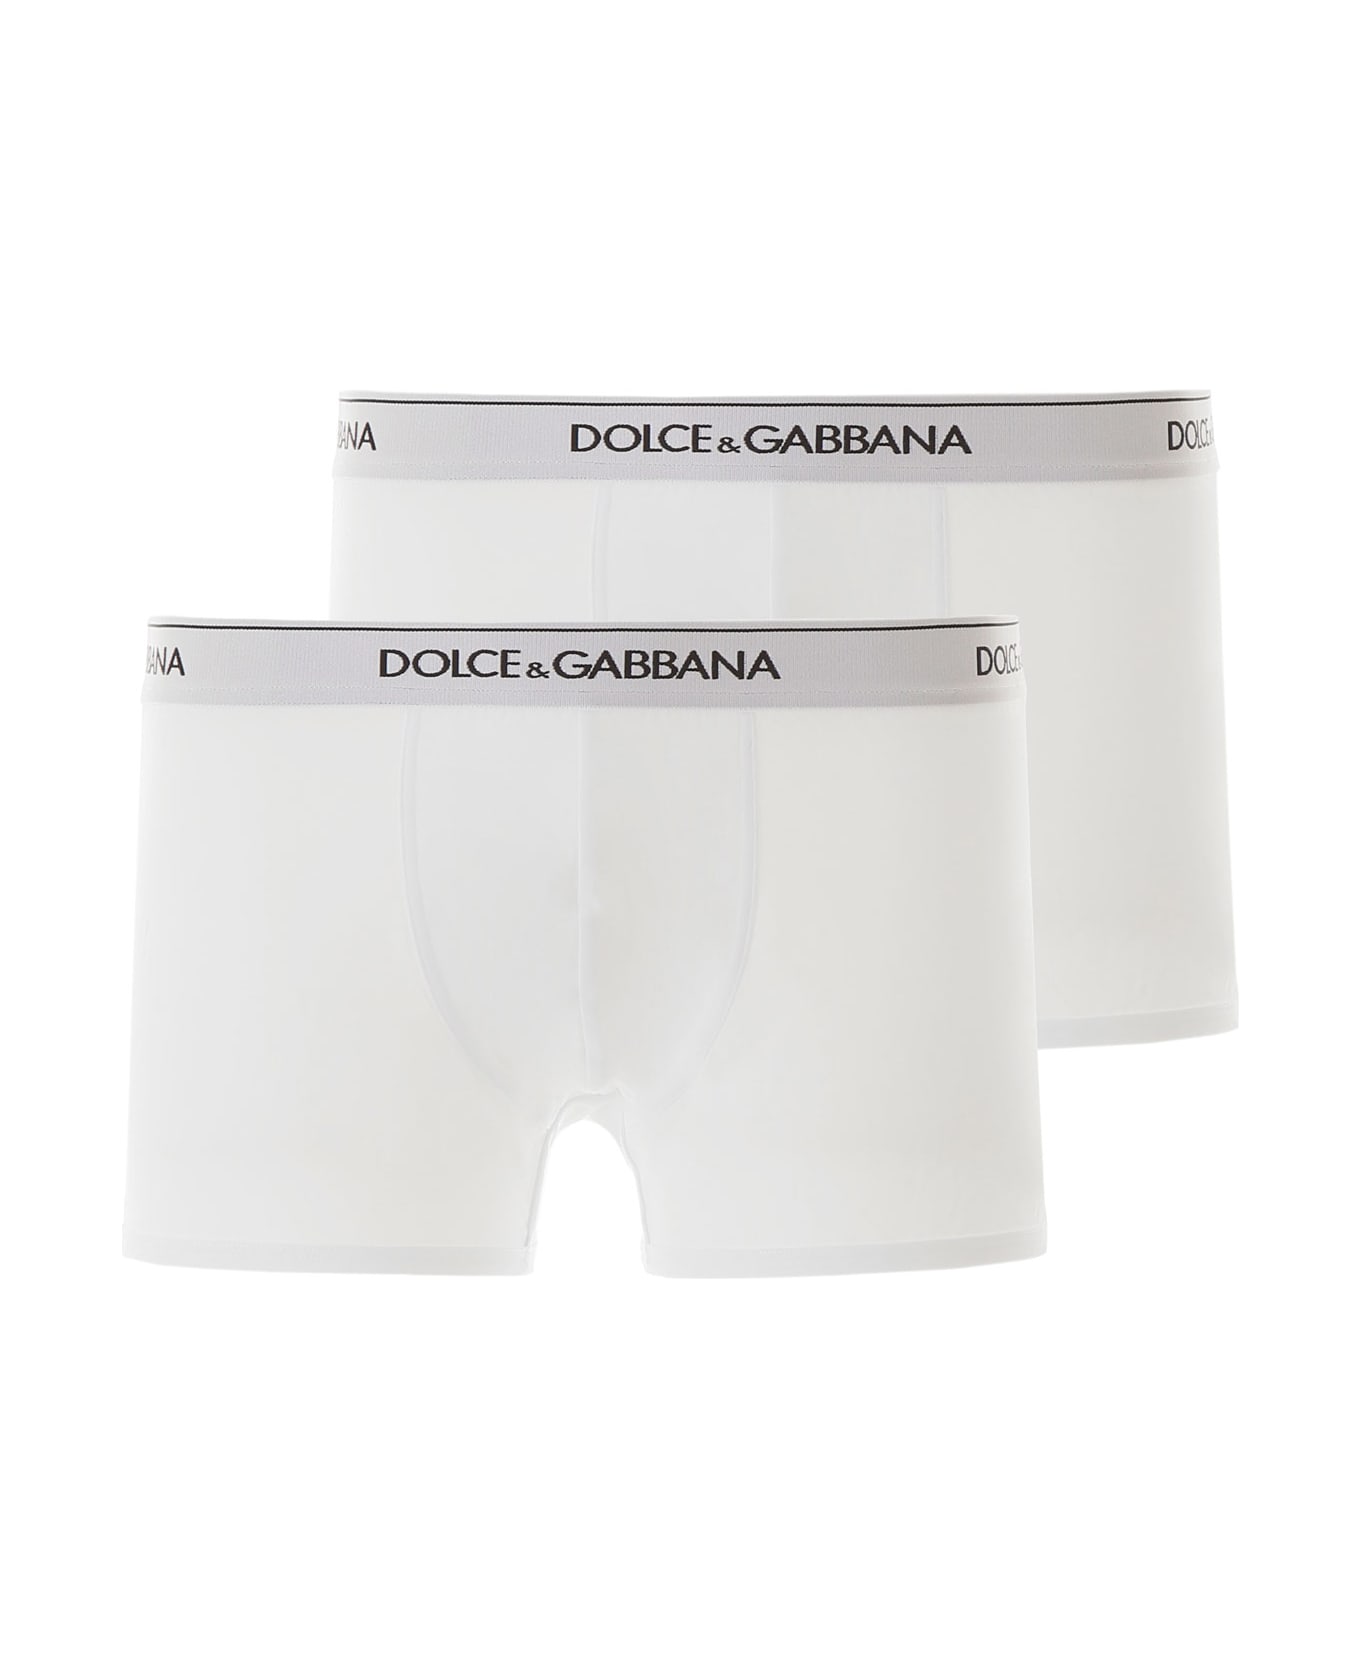 Dolce & Gabbana Two-panties Confection - Optic White ショーツ